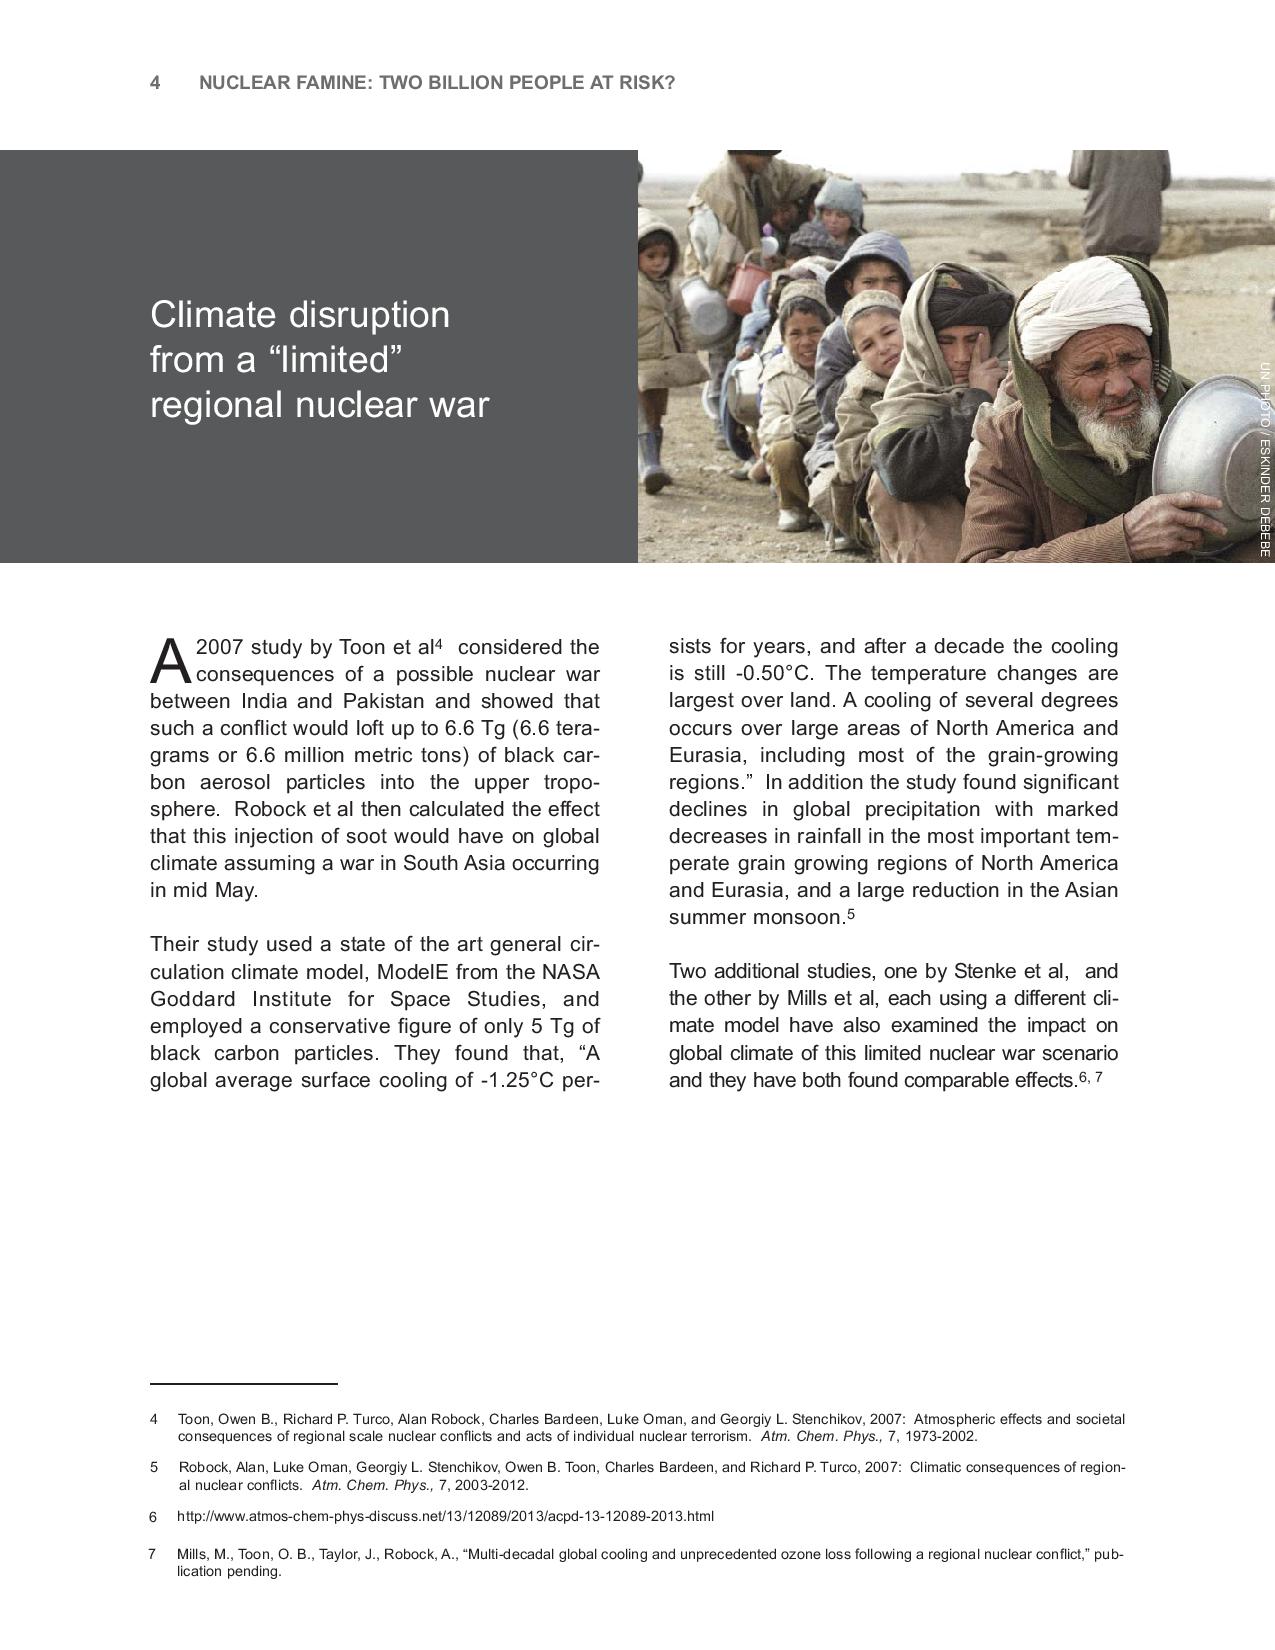 nuclear-famine-two-billion-at-risk-2013-page-006.jpg